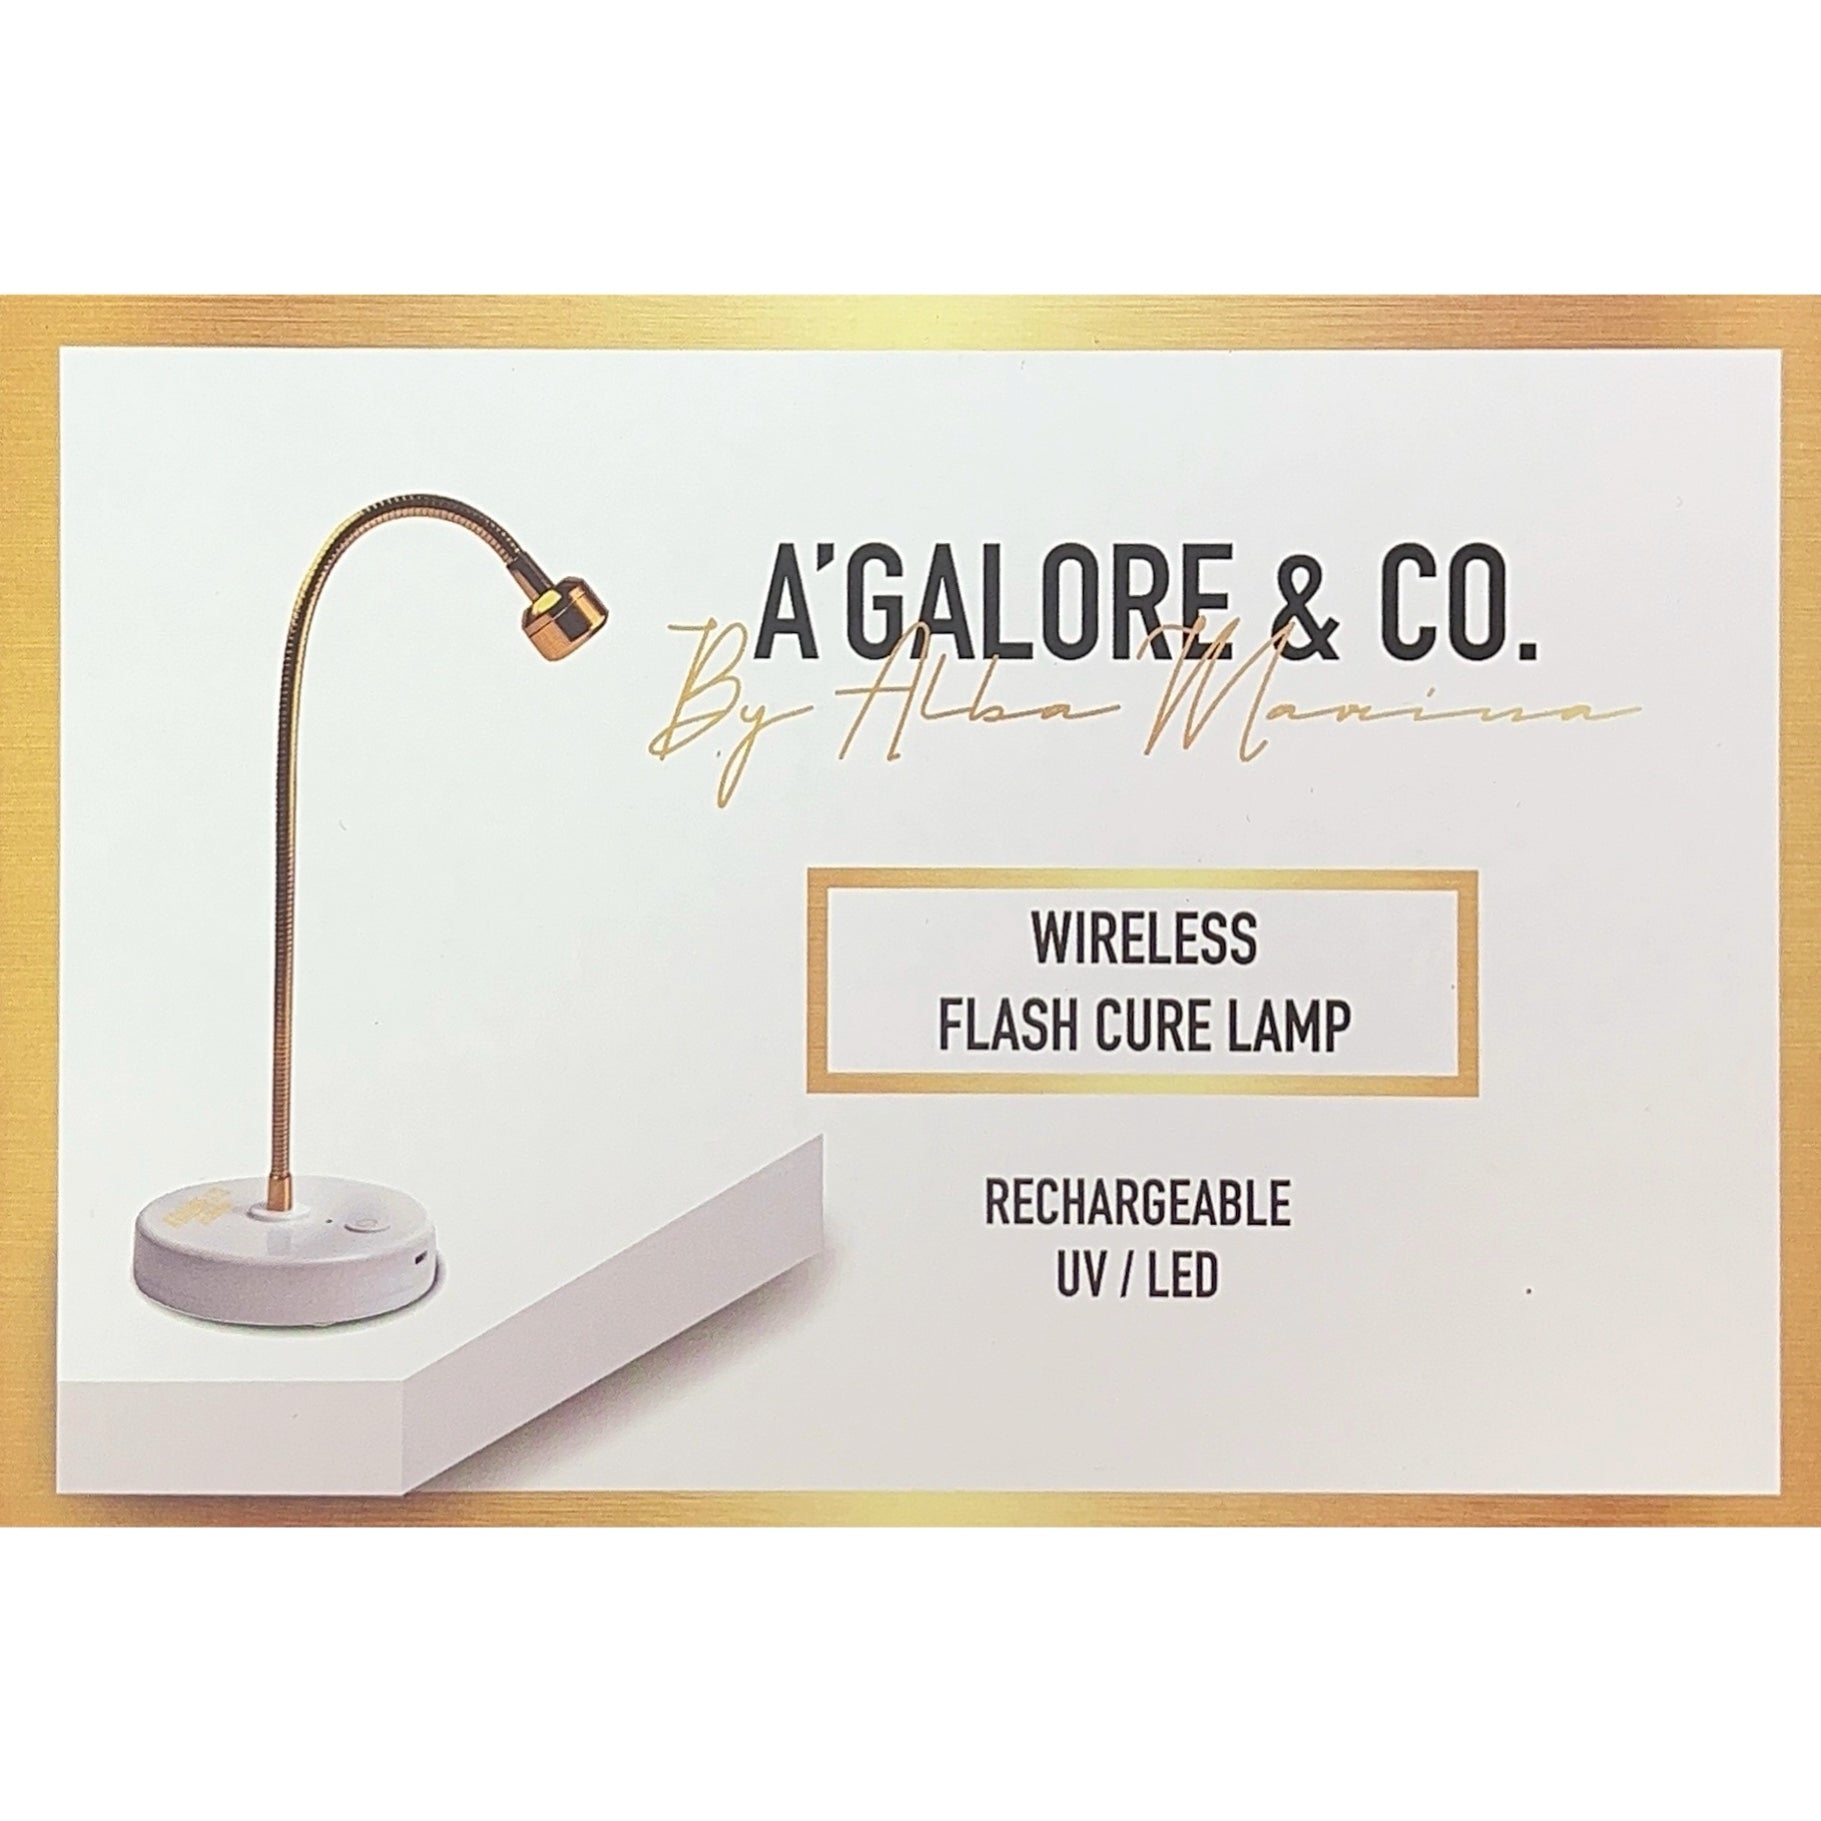 Wireless Flash Cure Lamp A’GALORE & CO.